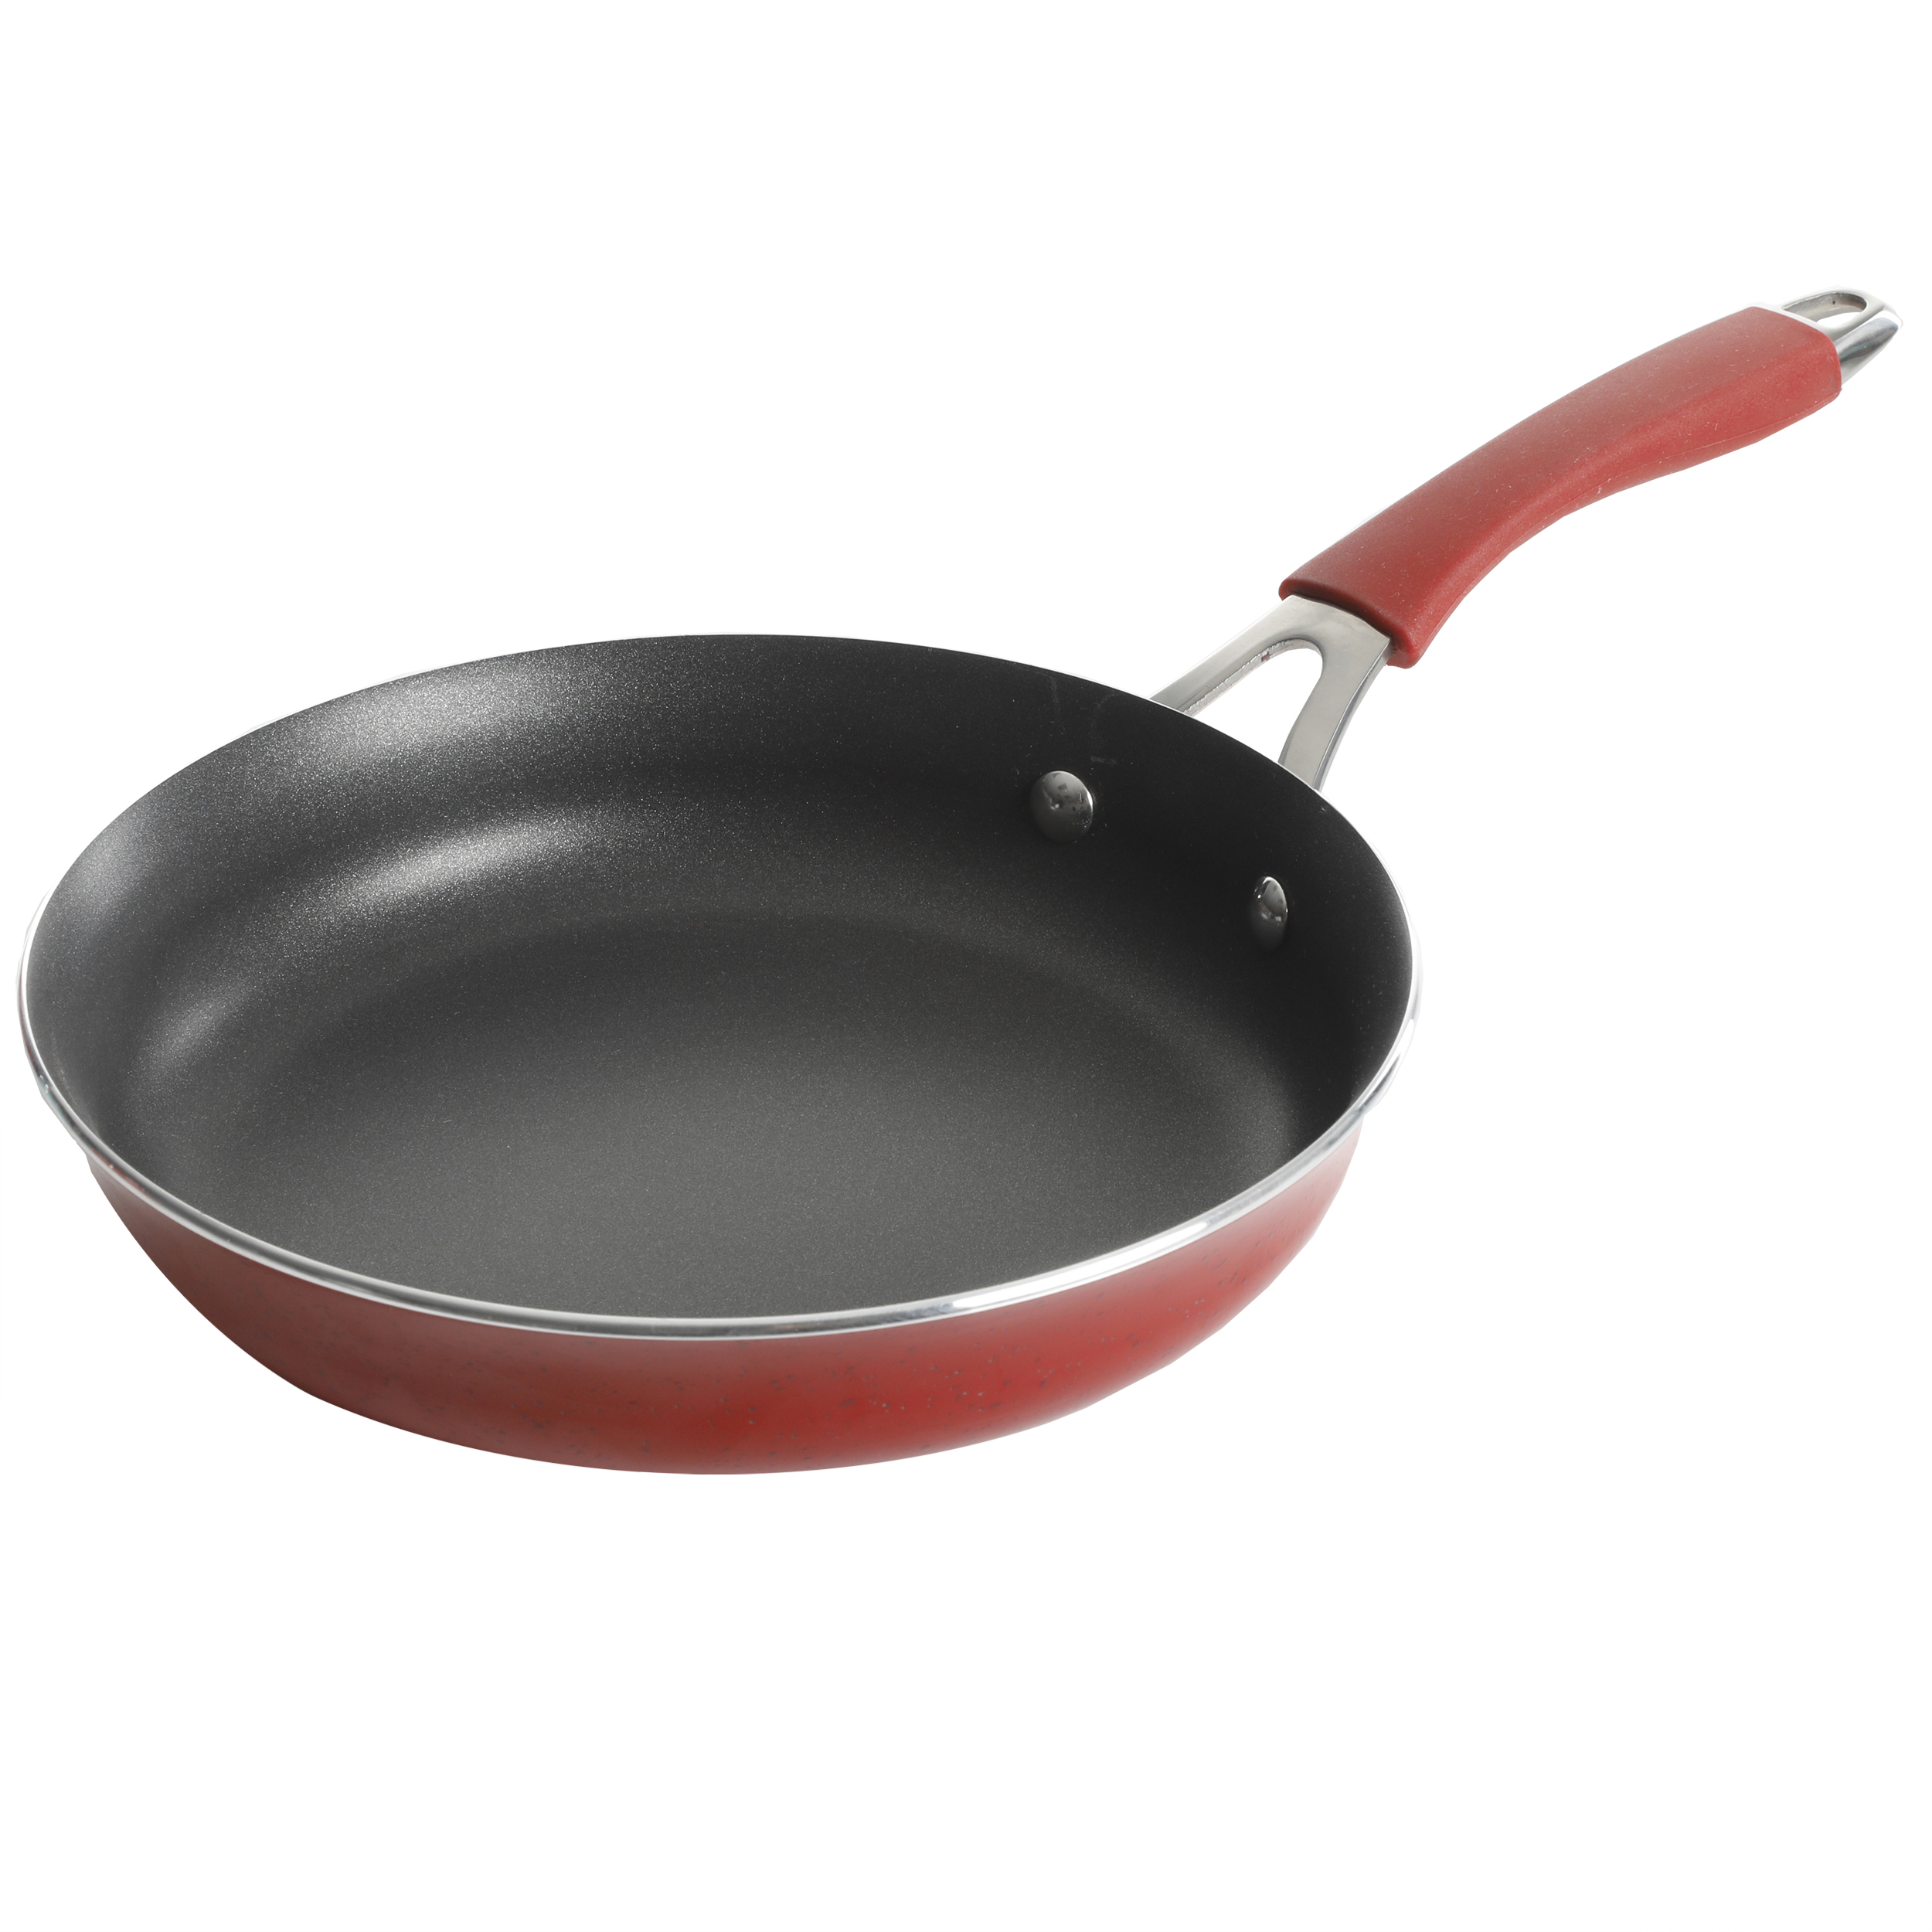 The Pioneer Woman Frontier 5-Piece Non-Stick Aluminum Cookware Set, Red - image 5 of 7